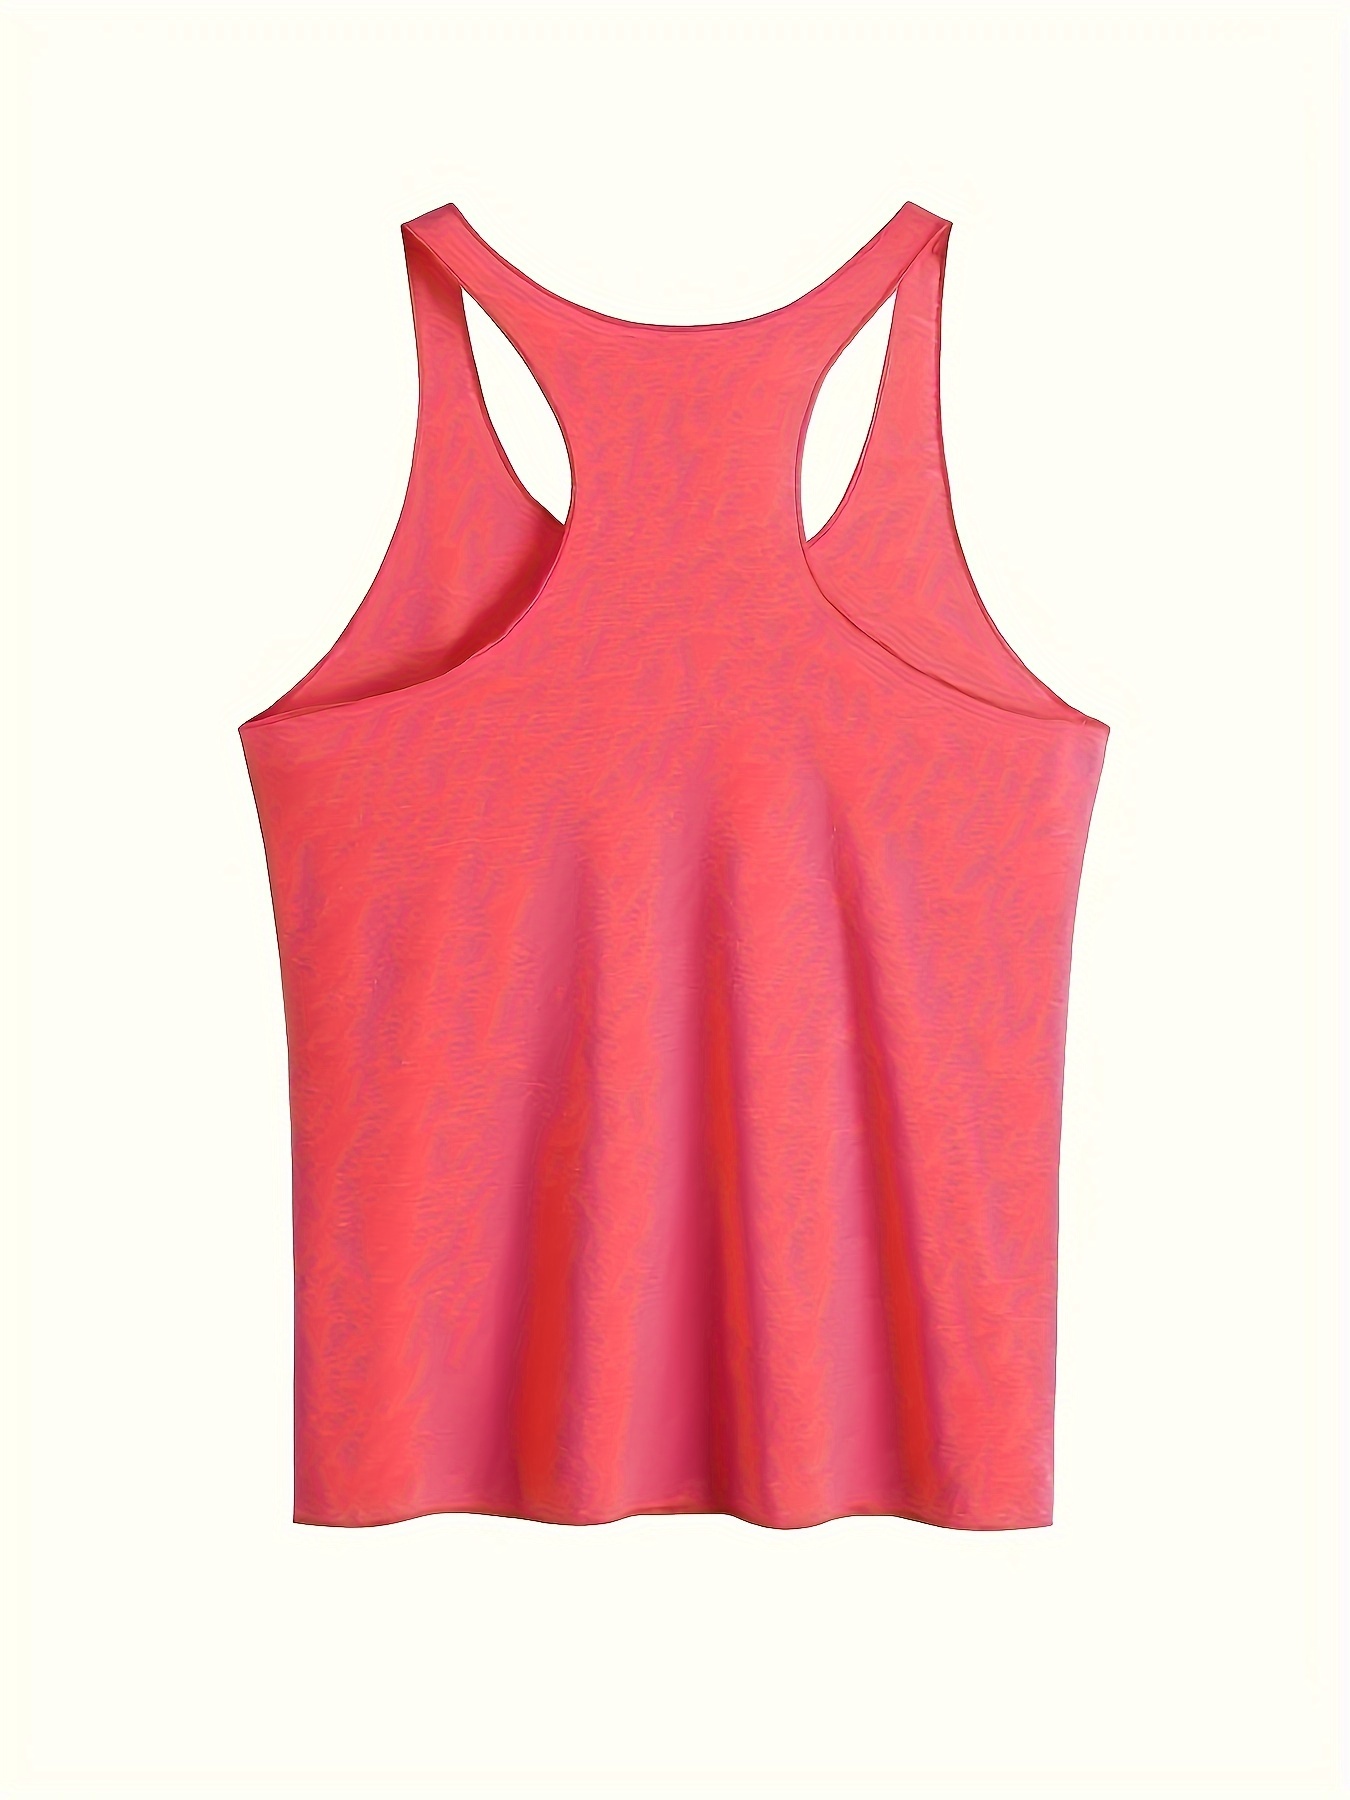 Fitness Singlet For Women  Running clothes, Fitness fashion, Ladies sports  tops